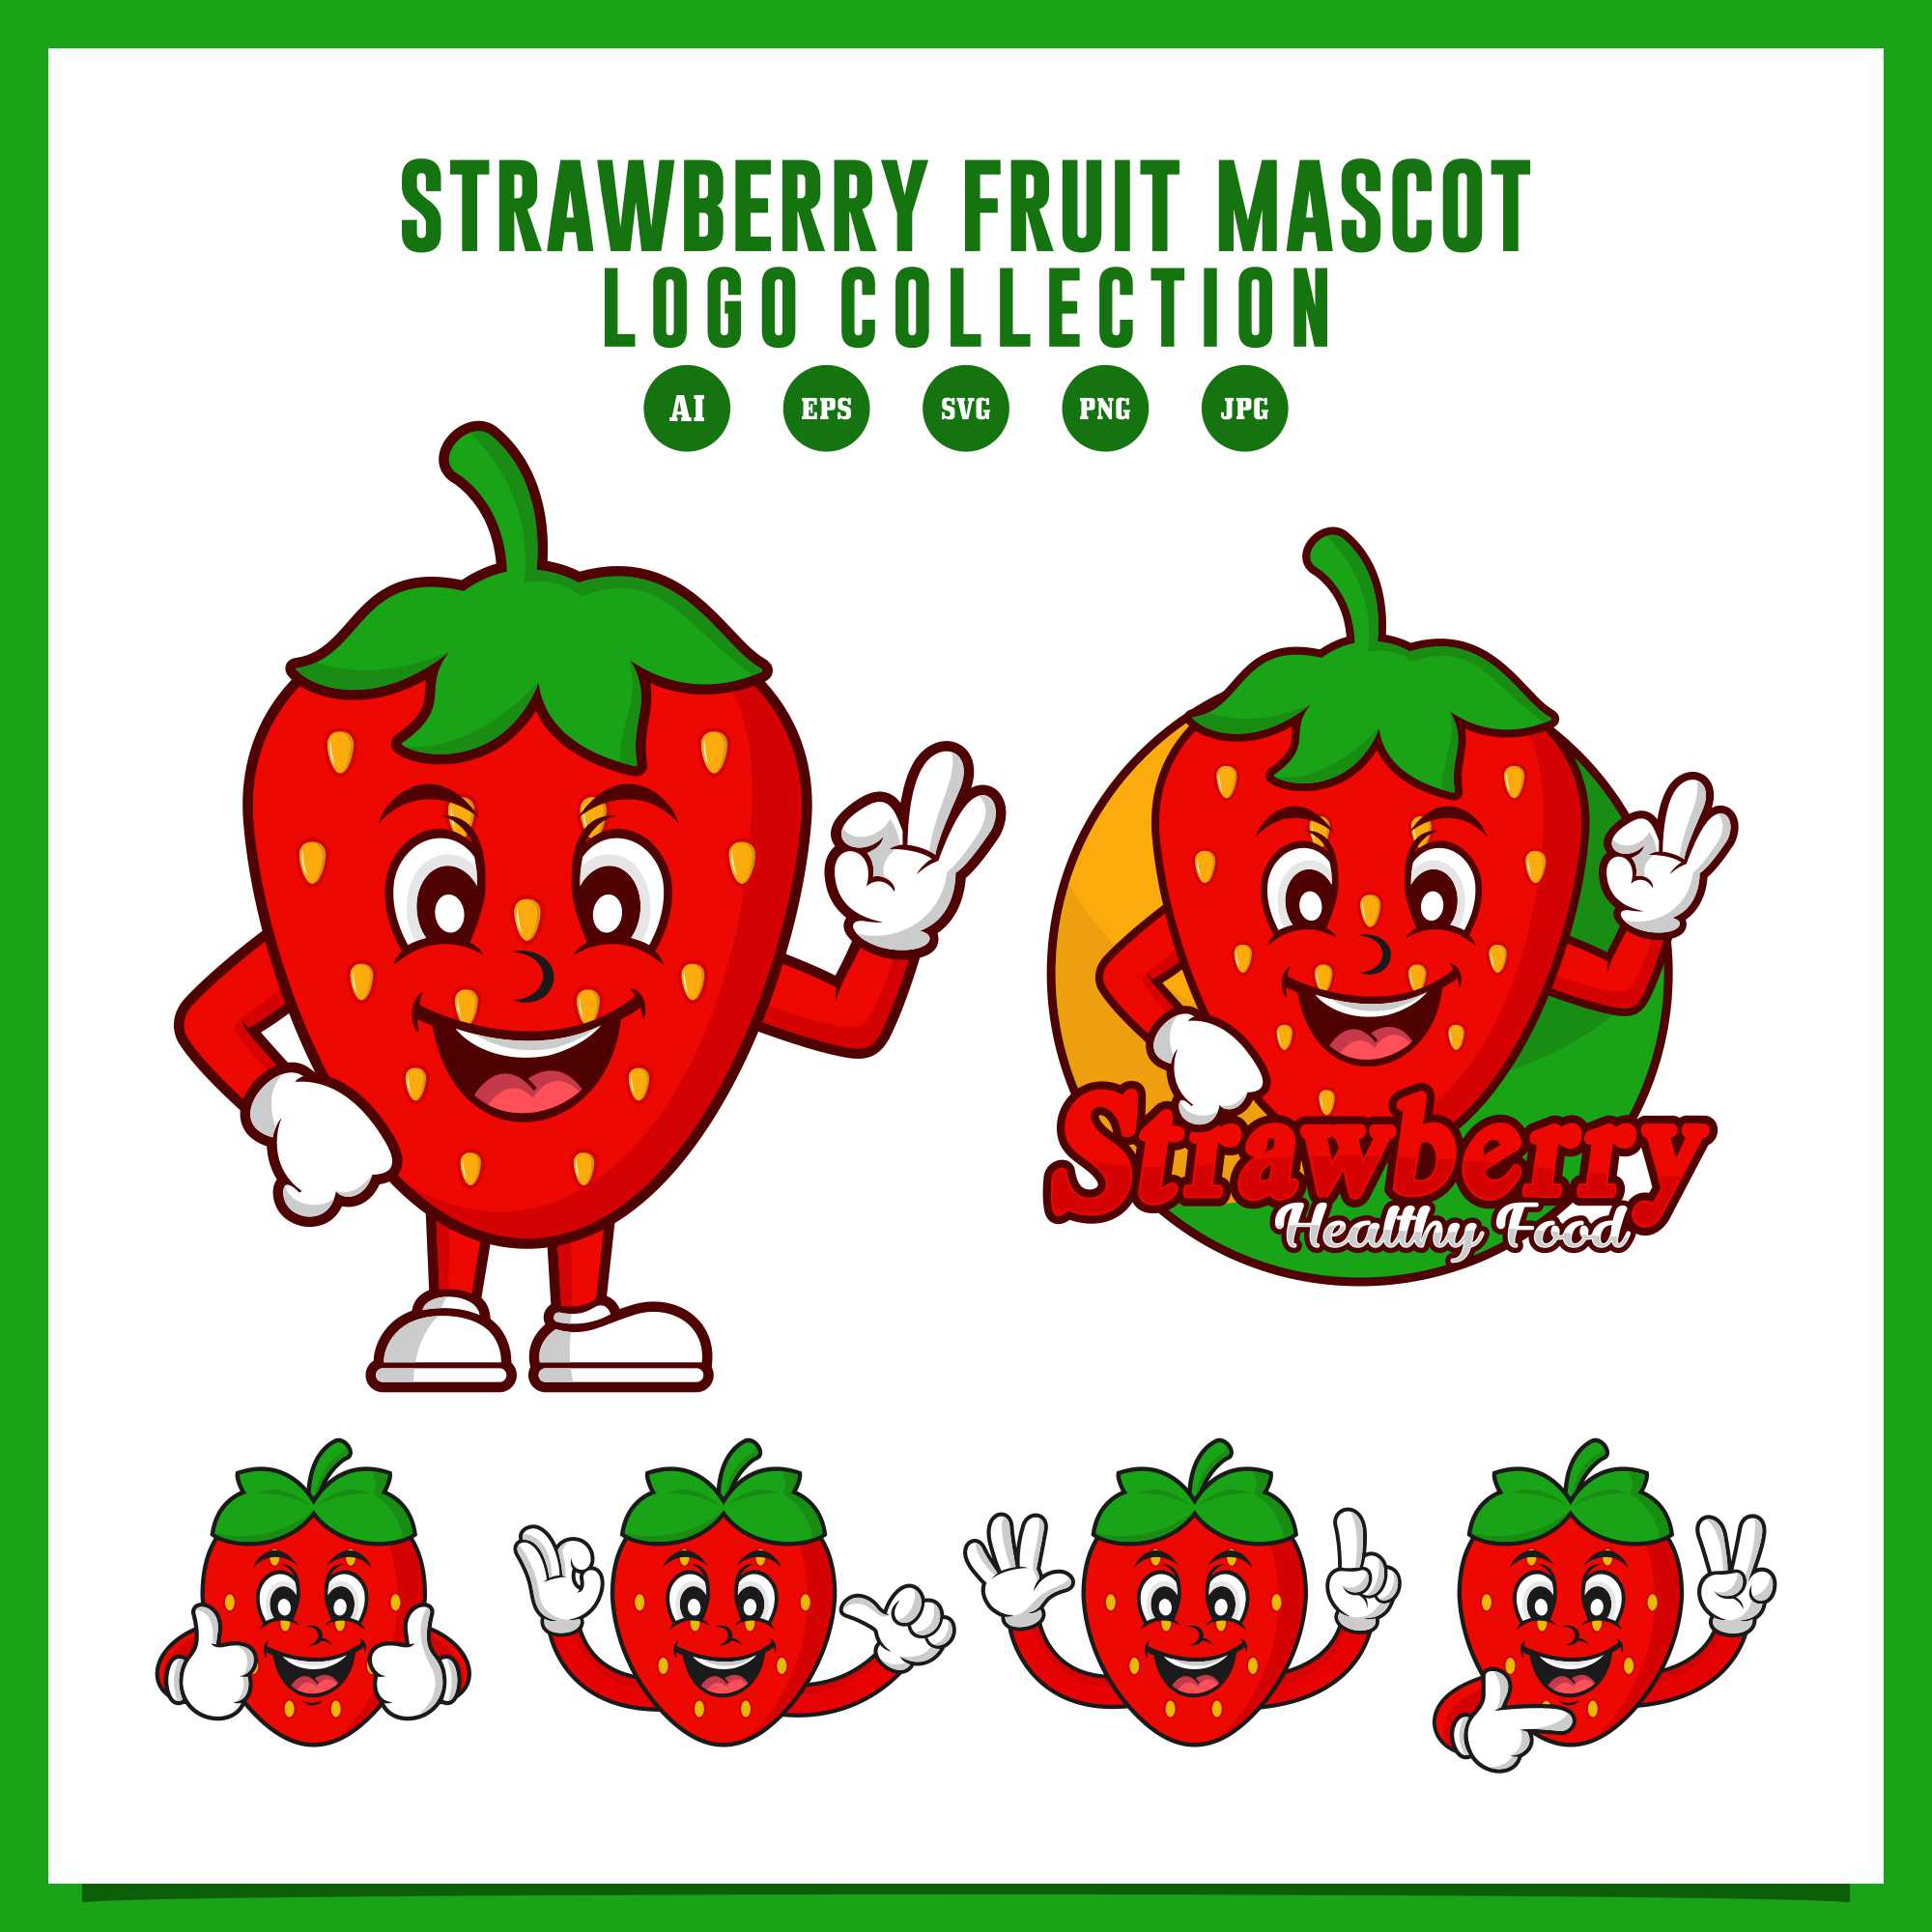 Set Strawberry fruit mascot design collection - $8 cover image.